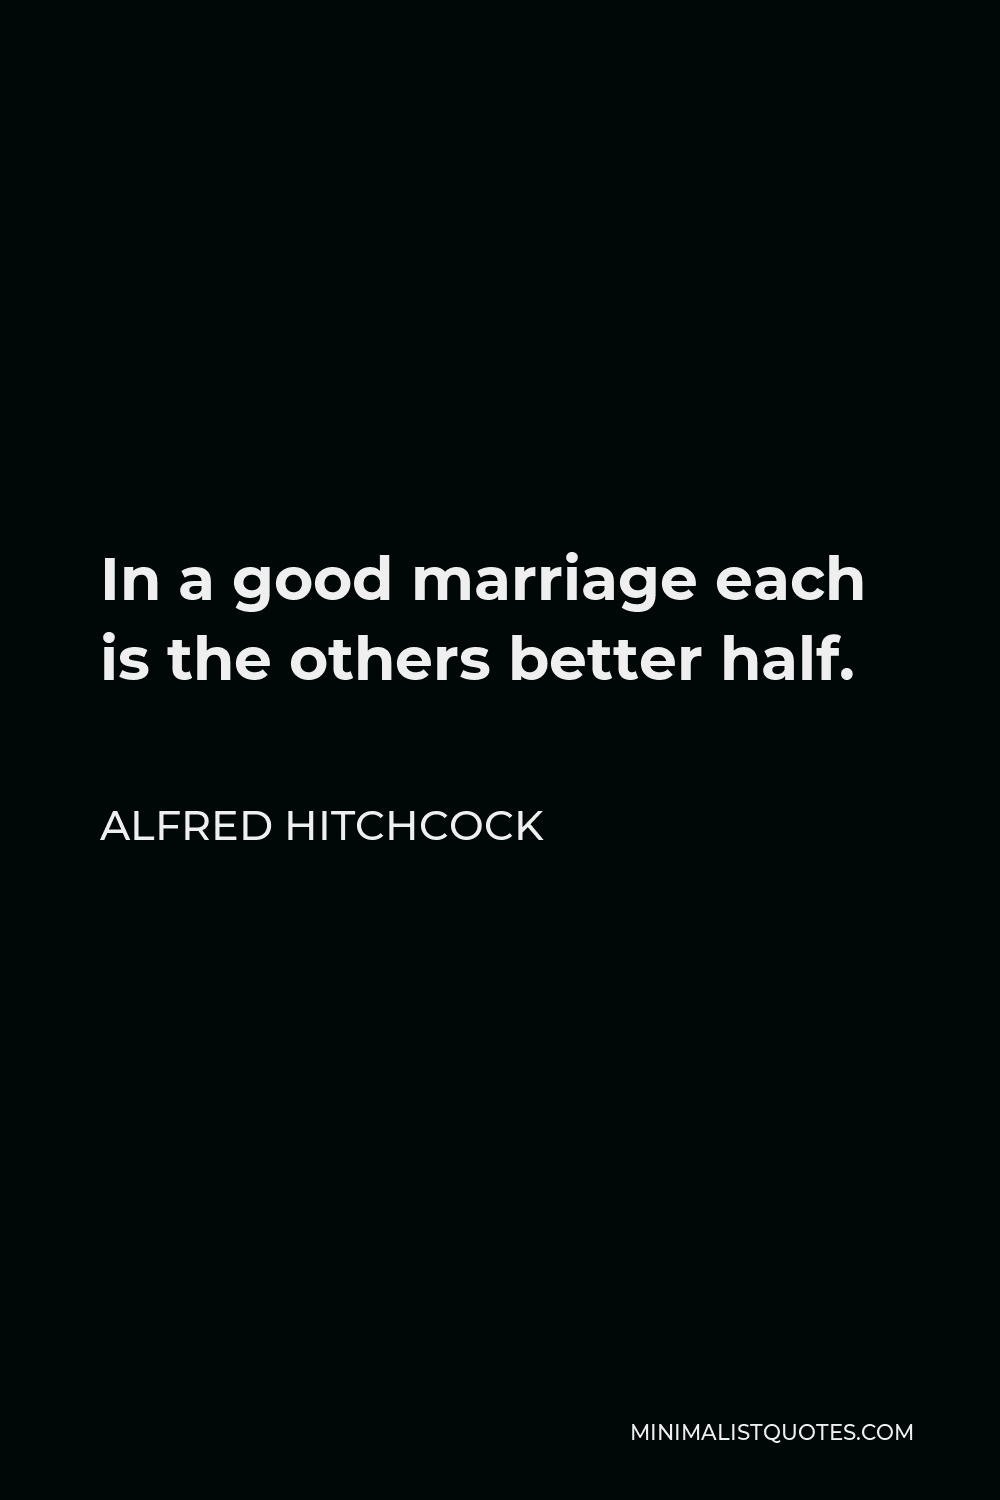 Alfred Hitchcock Quote - In a good marriage each is the others better half.